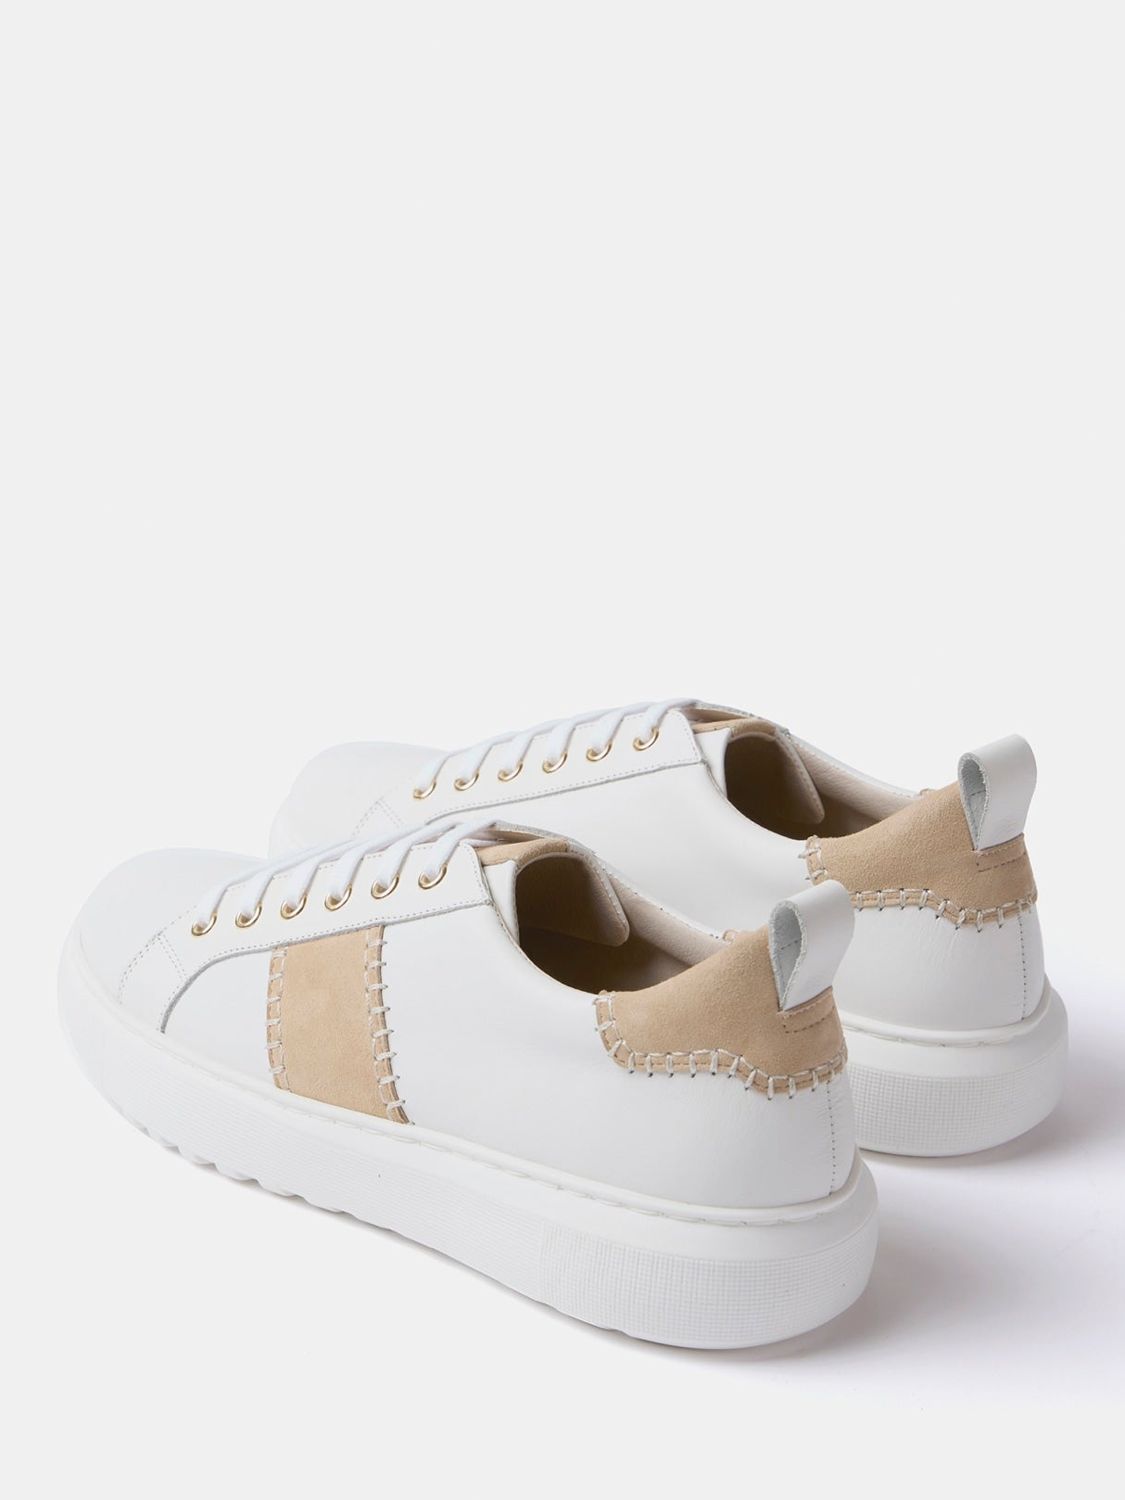 Buy Mint Velvet Suede Patchwork Panel Leather Trainers, White/Neutral Online at johnlewis.com